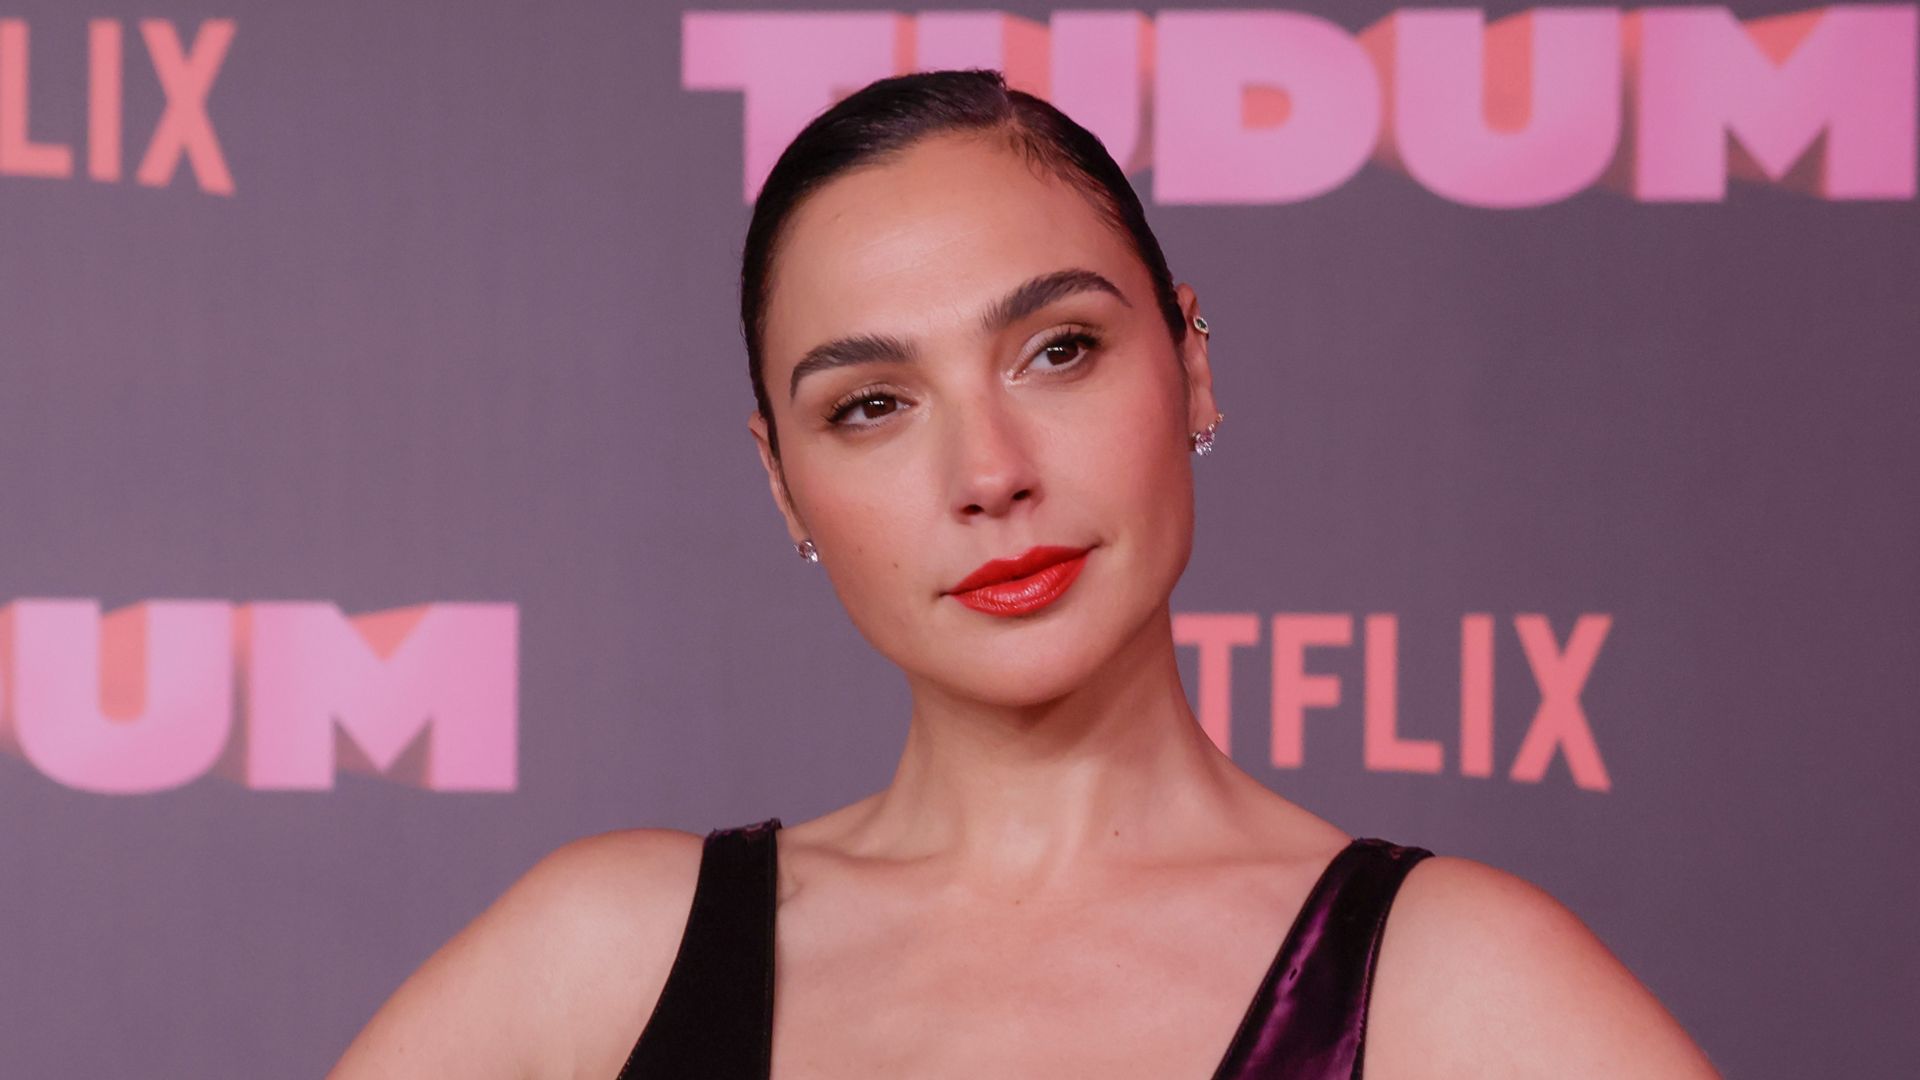 Gal Gadot displays svelte physique in skin tight plunging leather dress